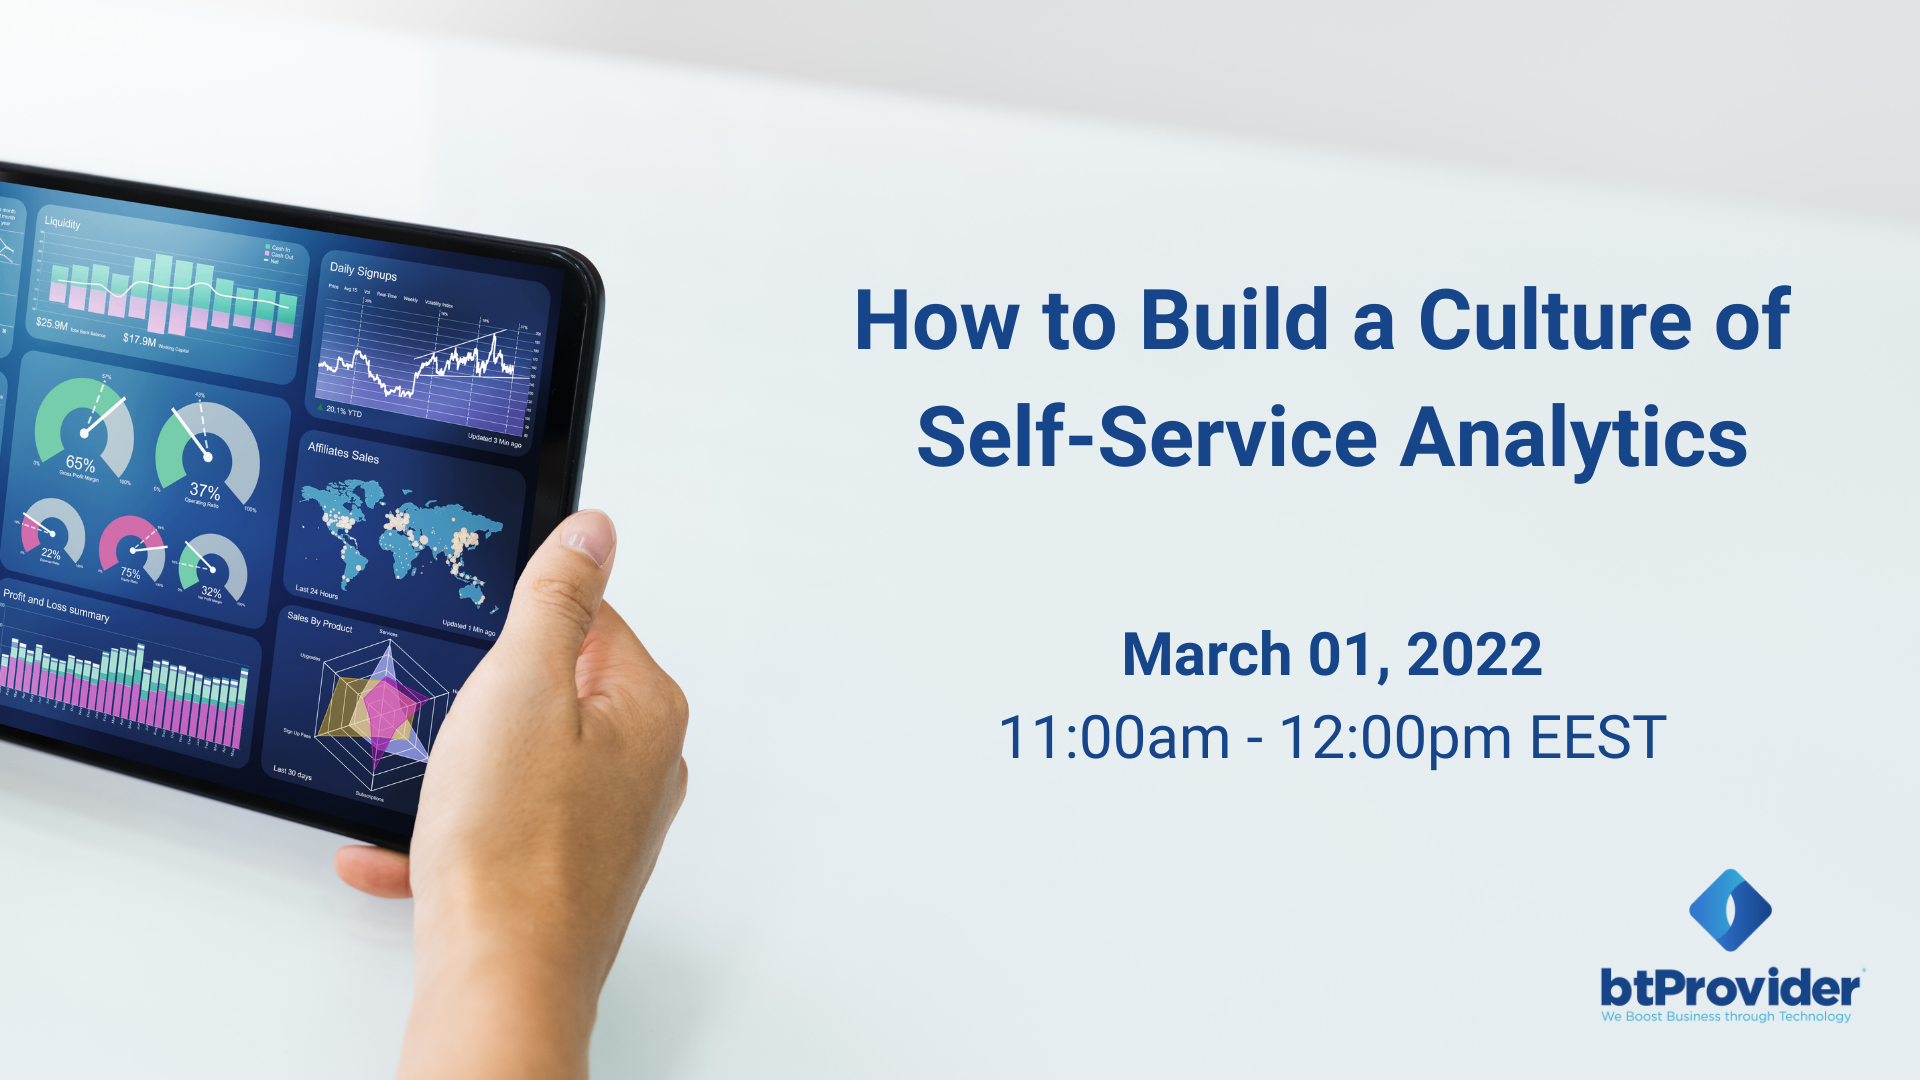 How to Build a Culture of Self-Service Analytics